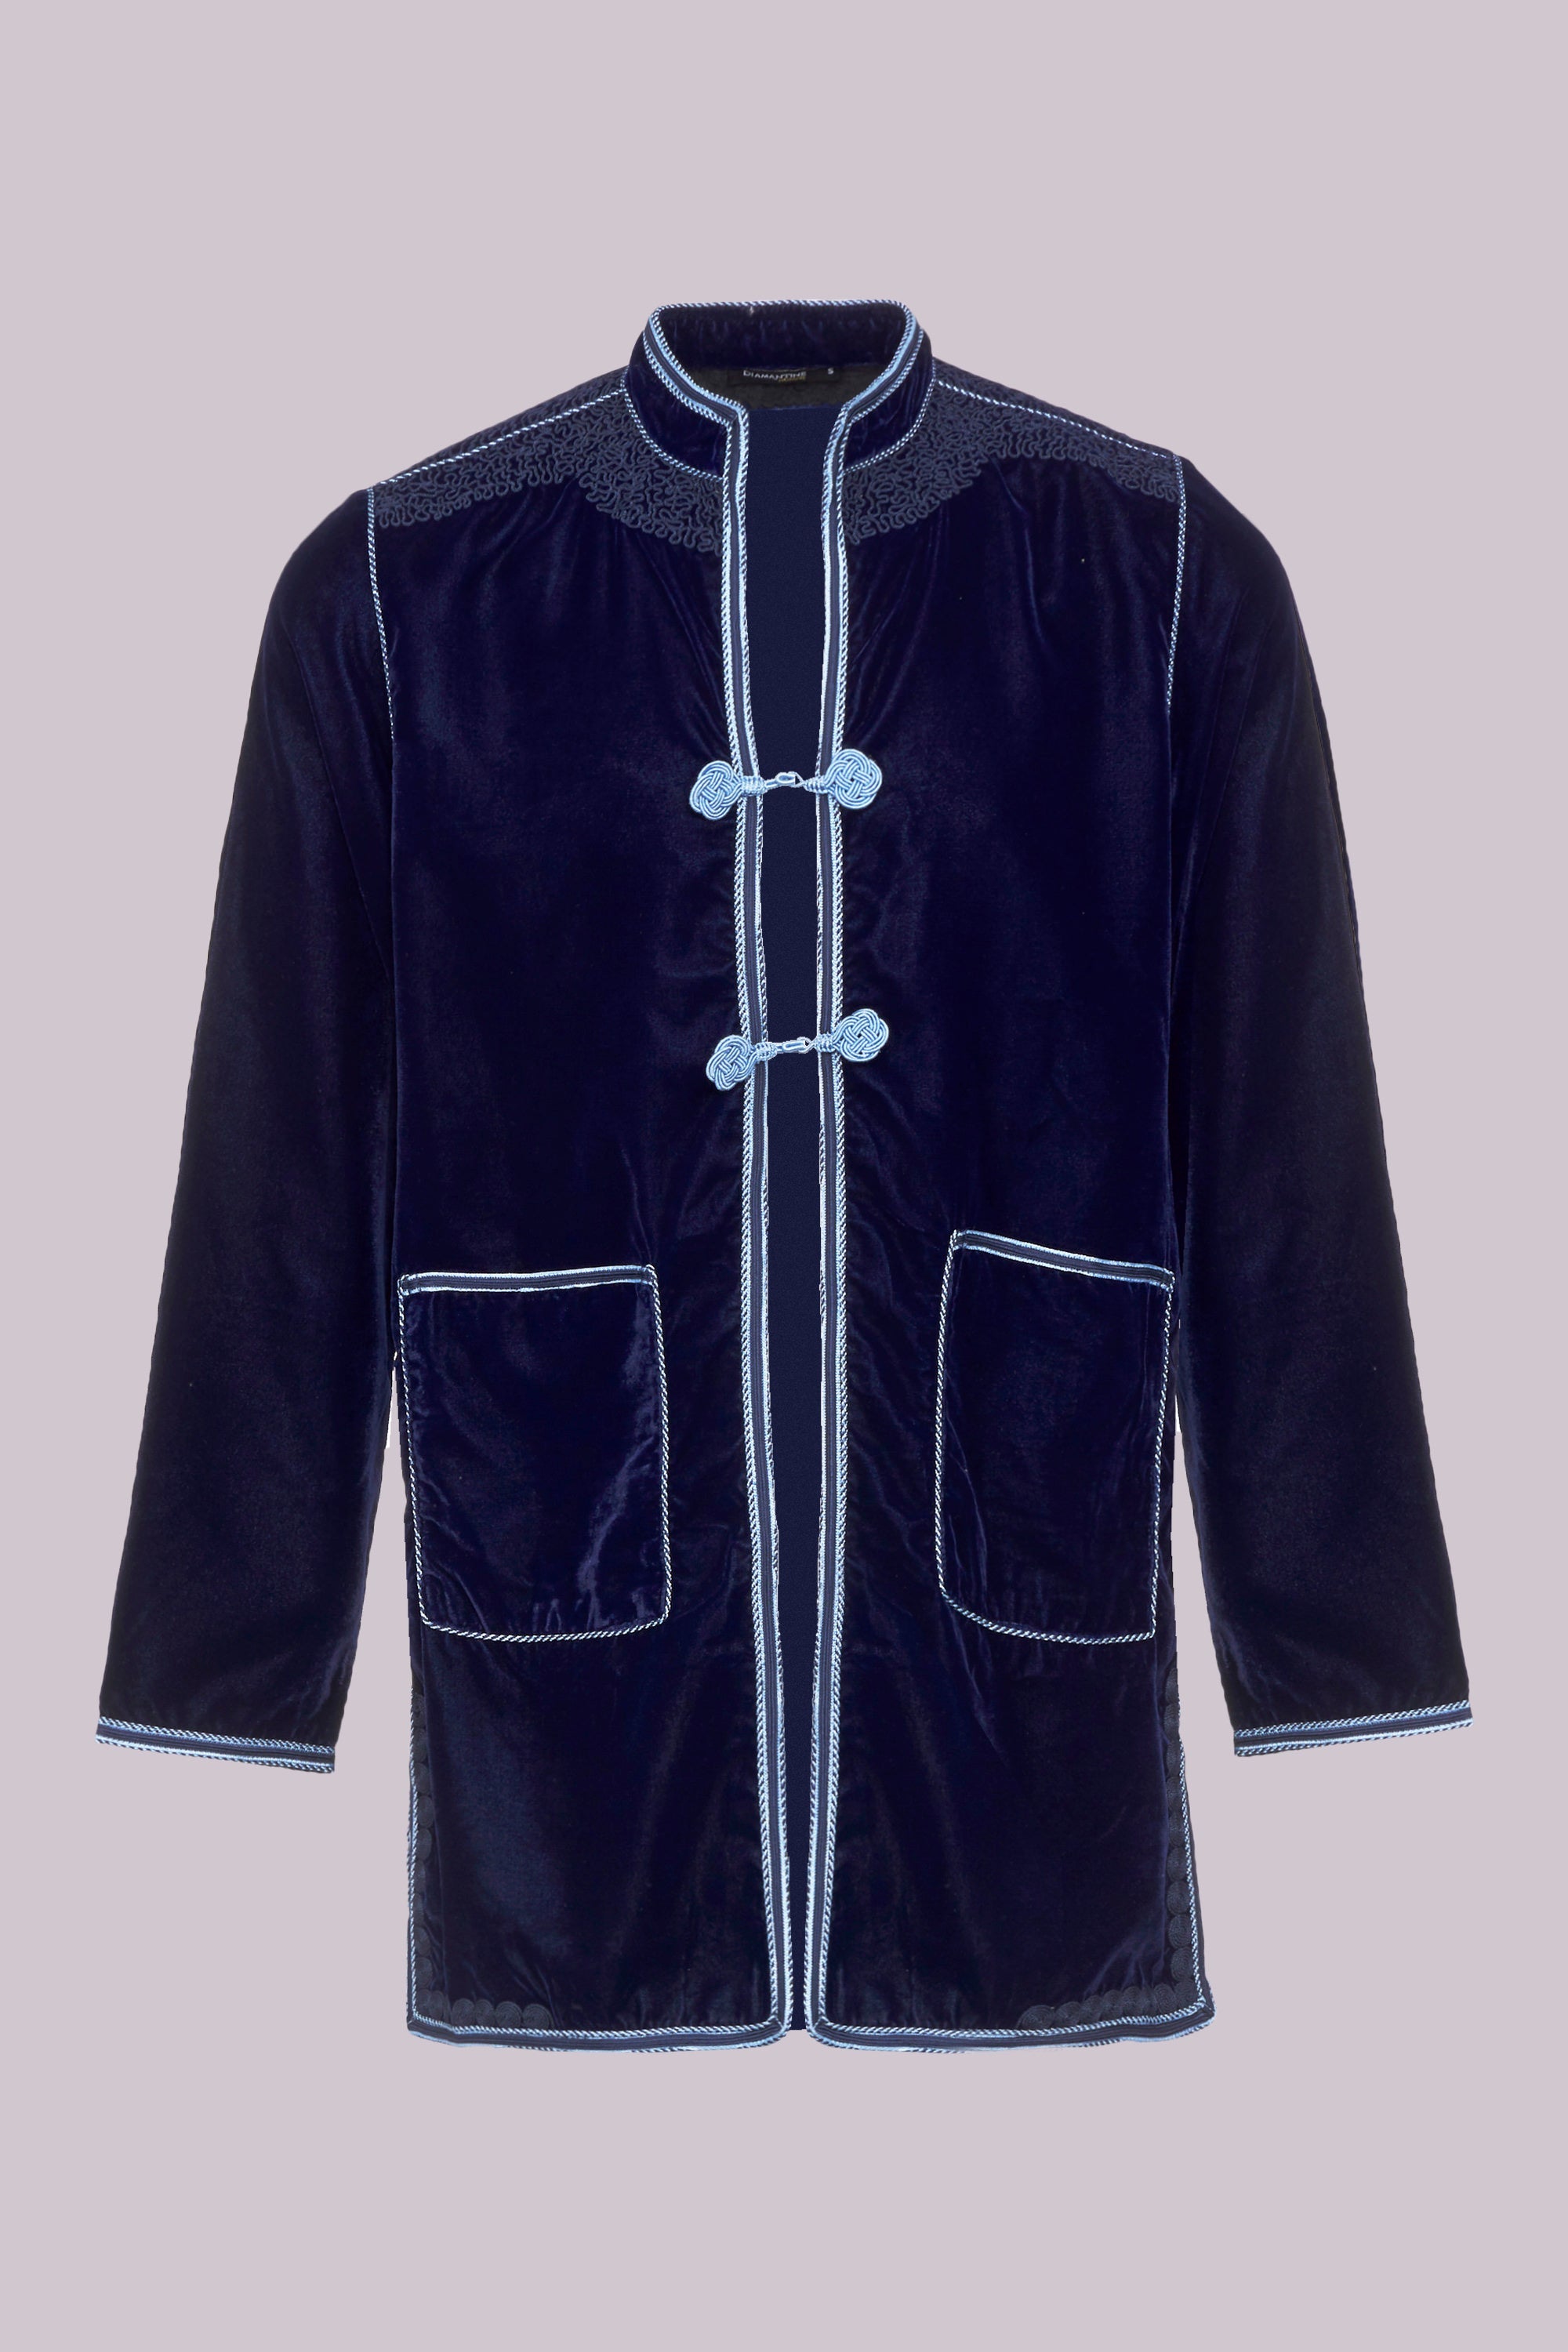 Opacto Men's Velour Longline Jacket in Navy with Contrast Light Blue Stitching